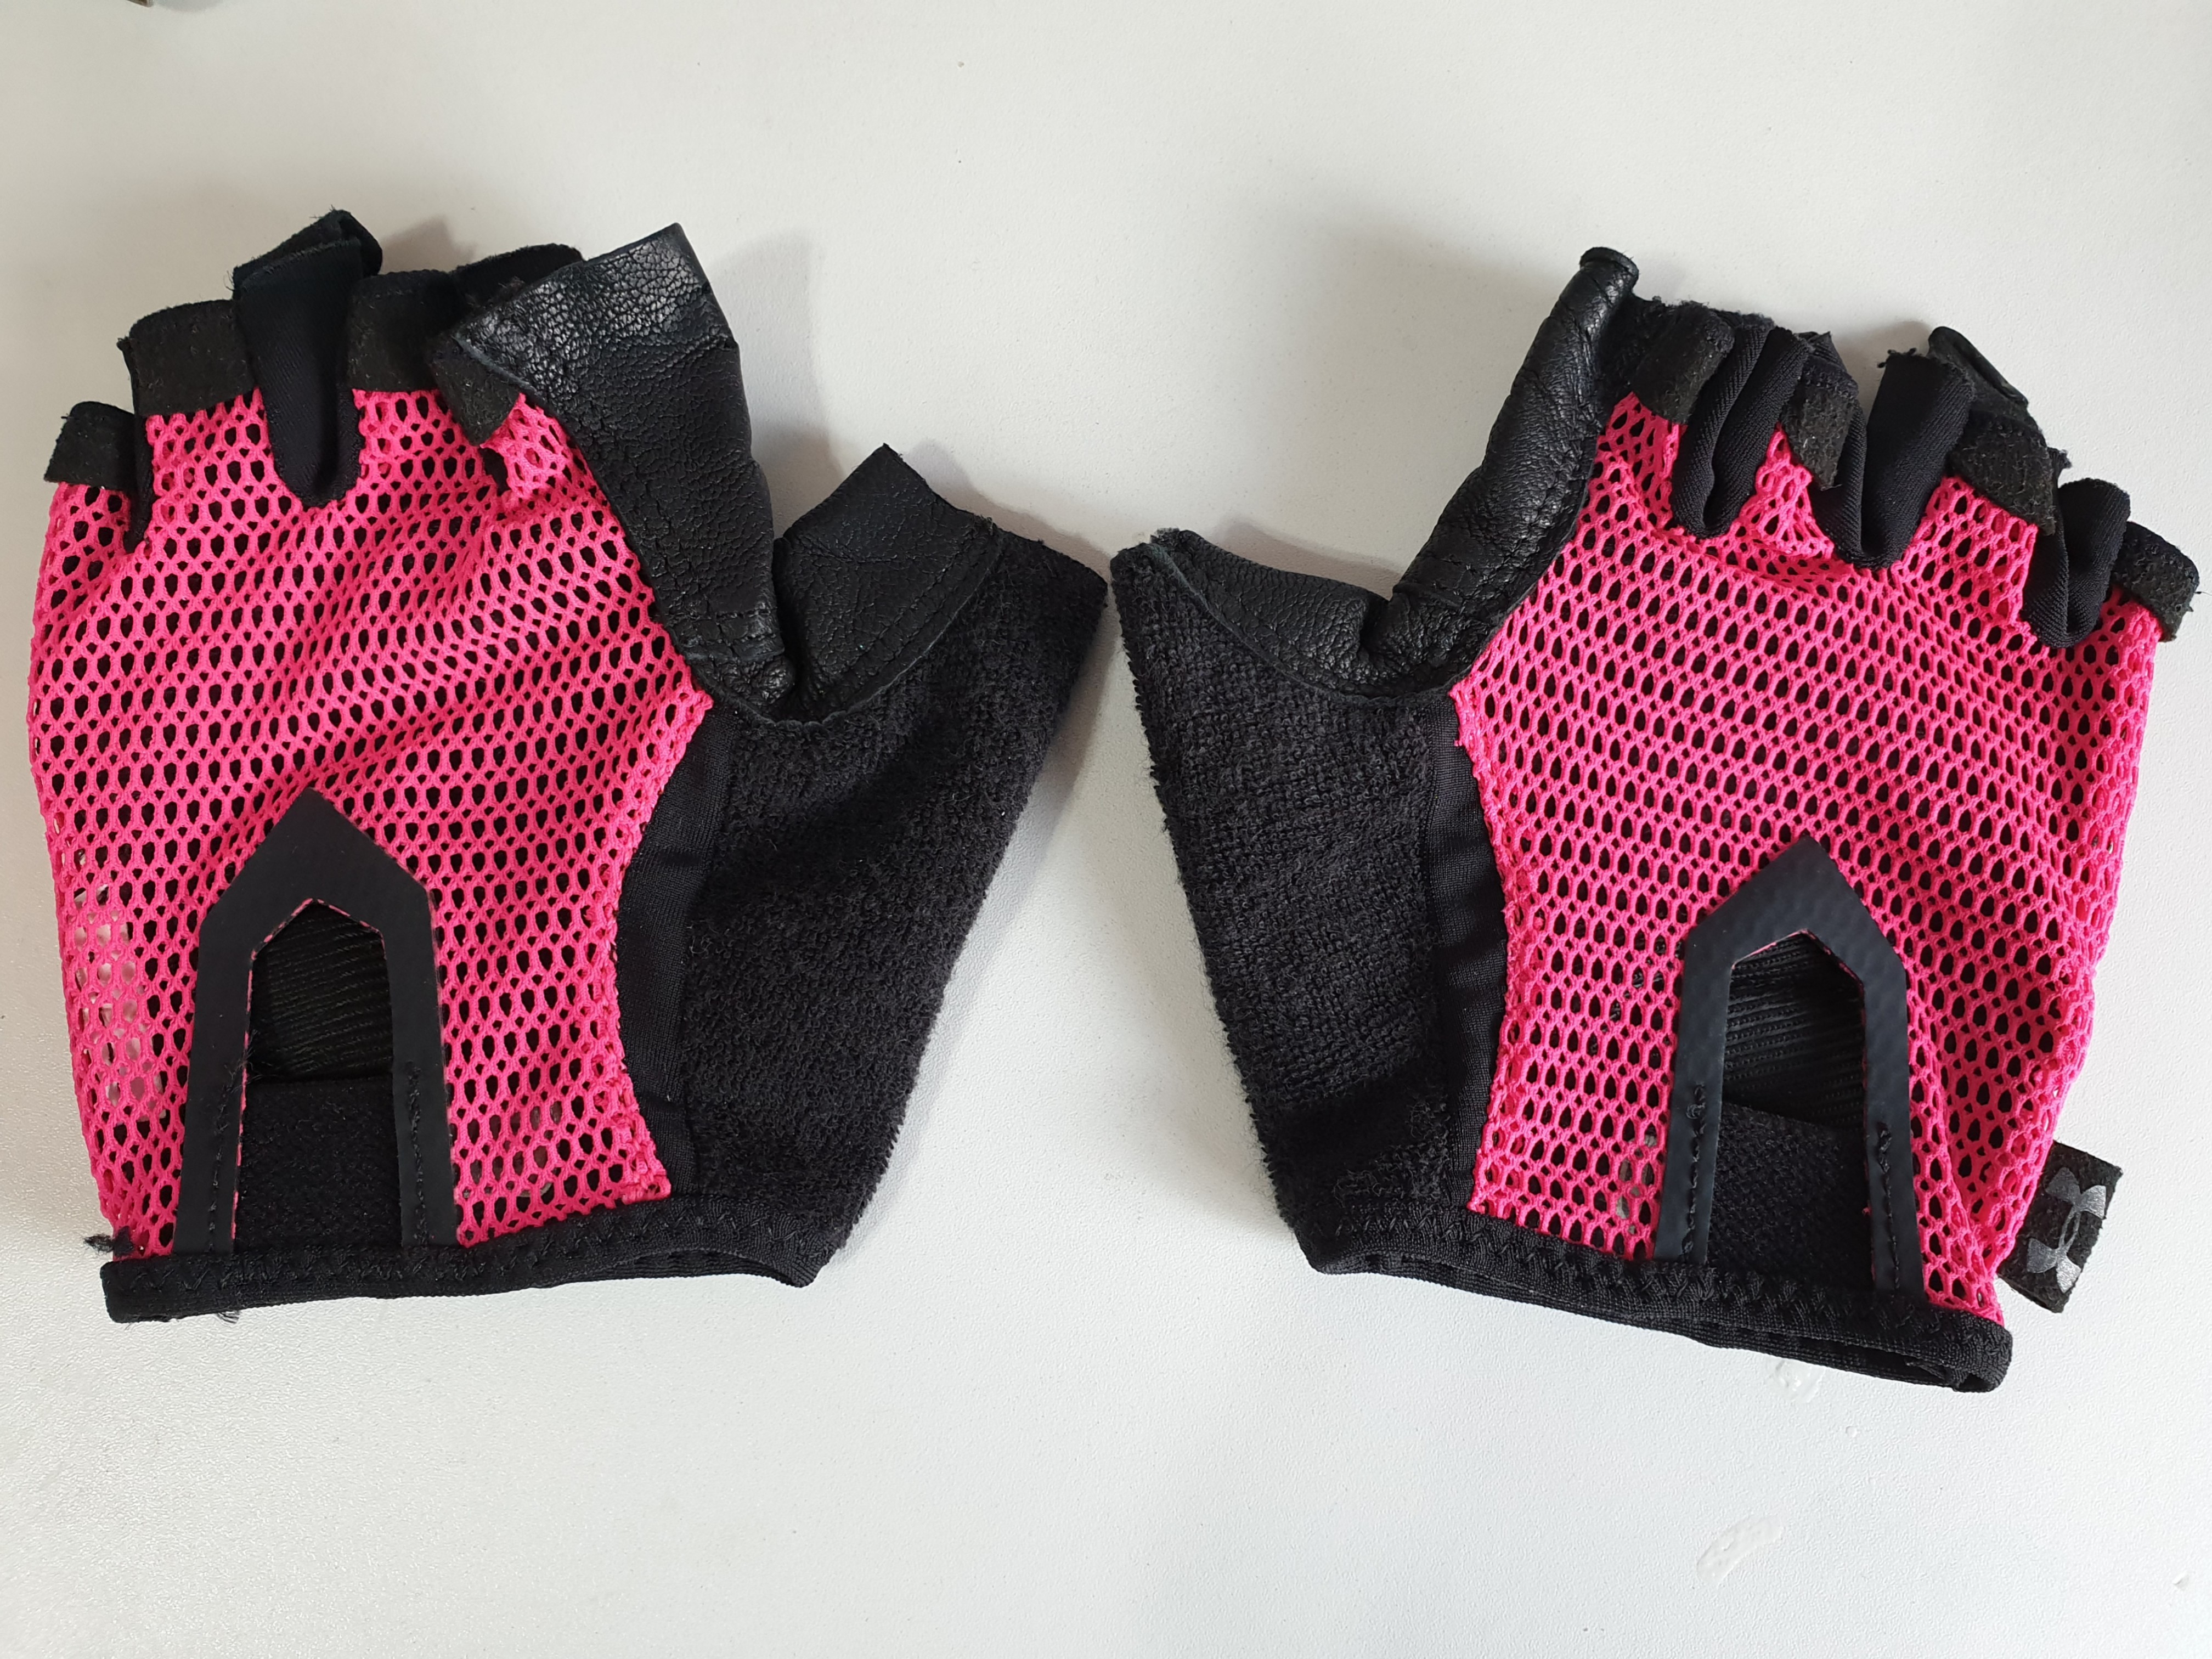 under armour youth pink football gloves